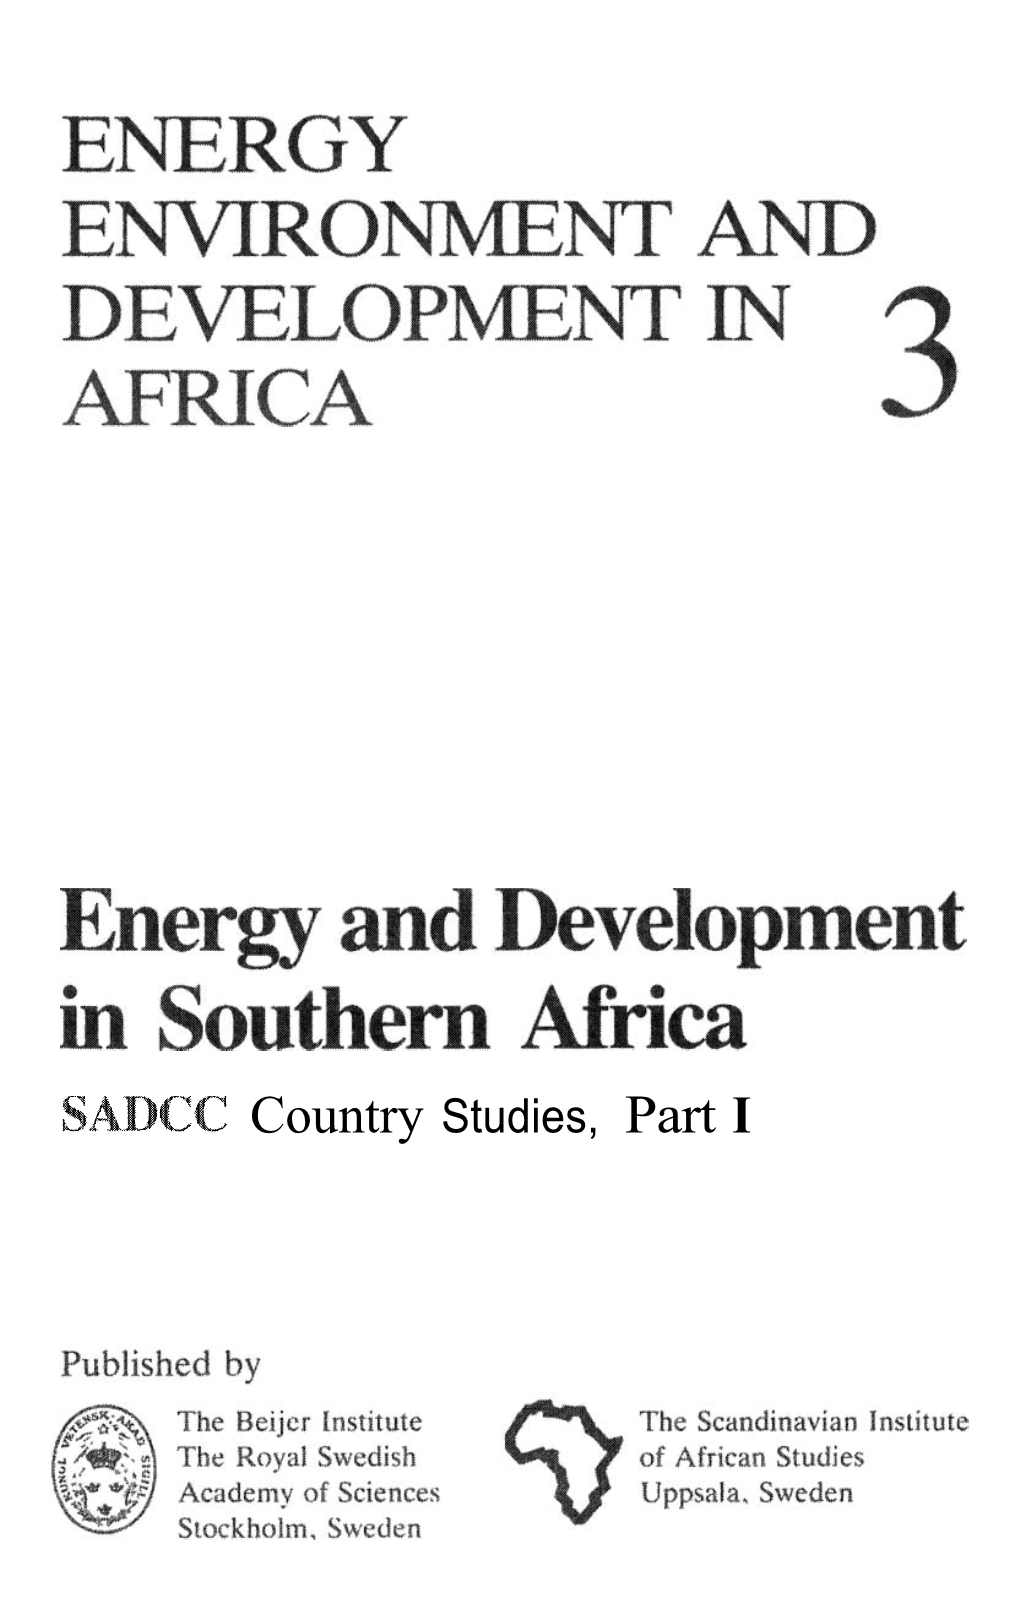 SADCC Country Studies, Part I ENERGY, ENVIRONMENT and DEVELOPMENT in AFRICA 3